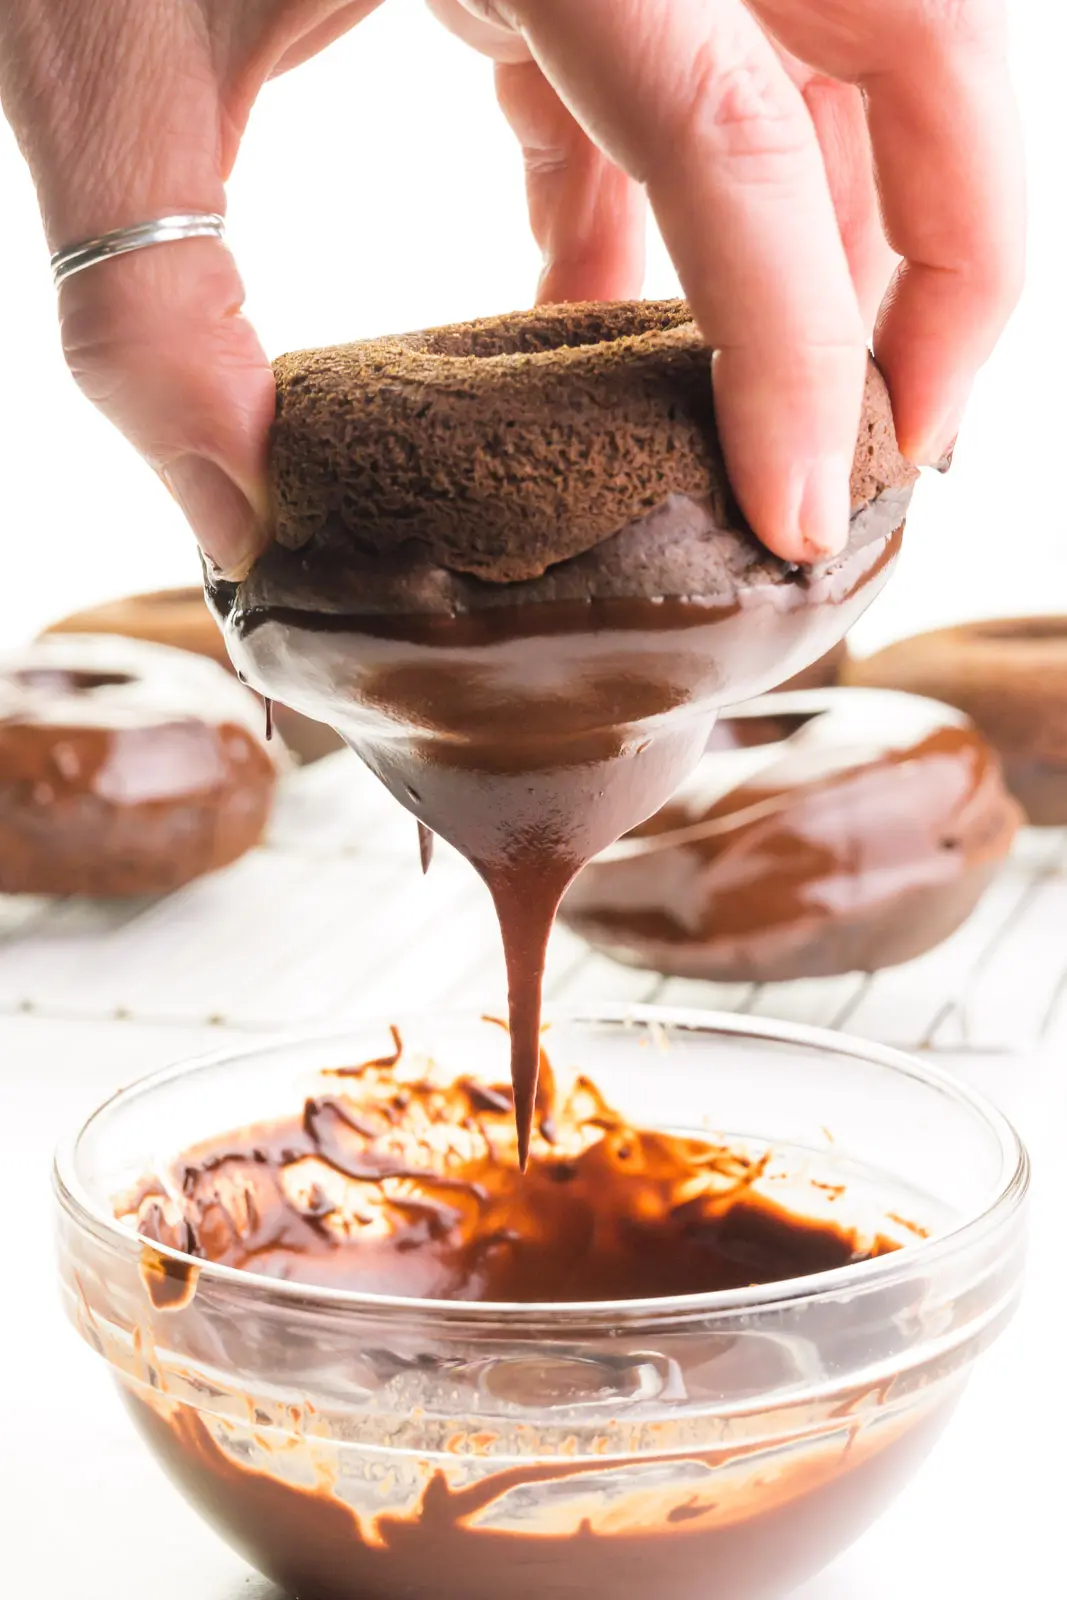 A hand holds a chocolate donut over a bowl of chocolate glaze. Some of the glaze is dripping off the donut. There are glazed donuts in the background.